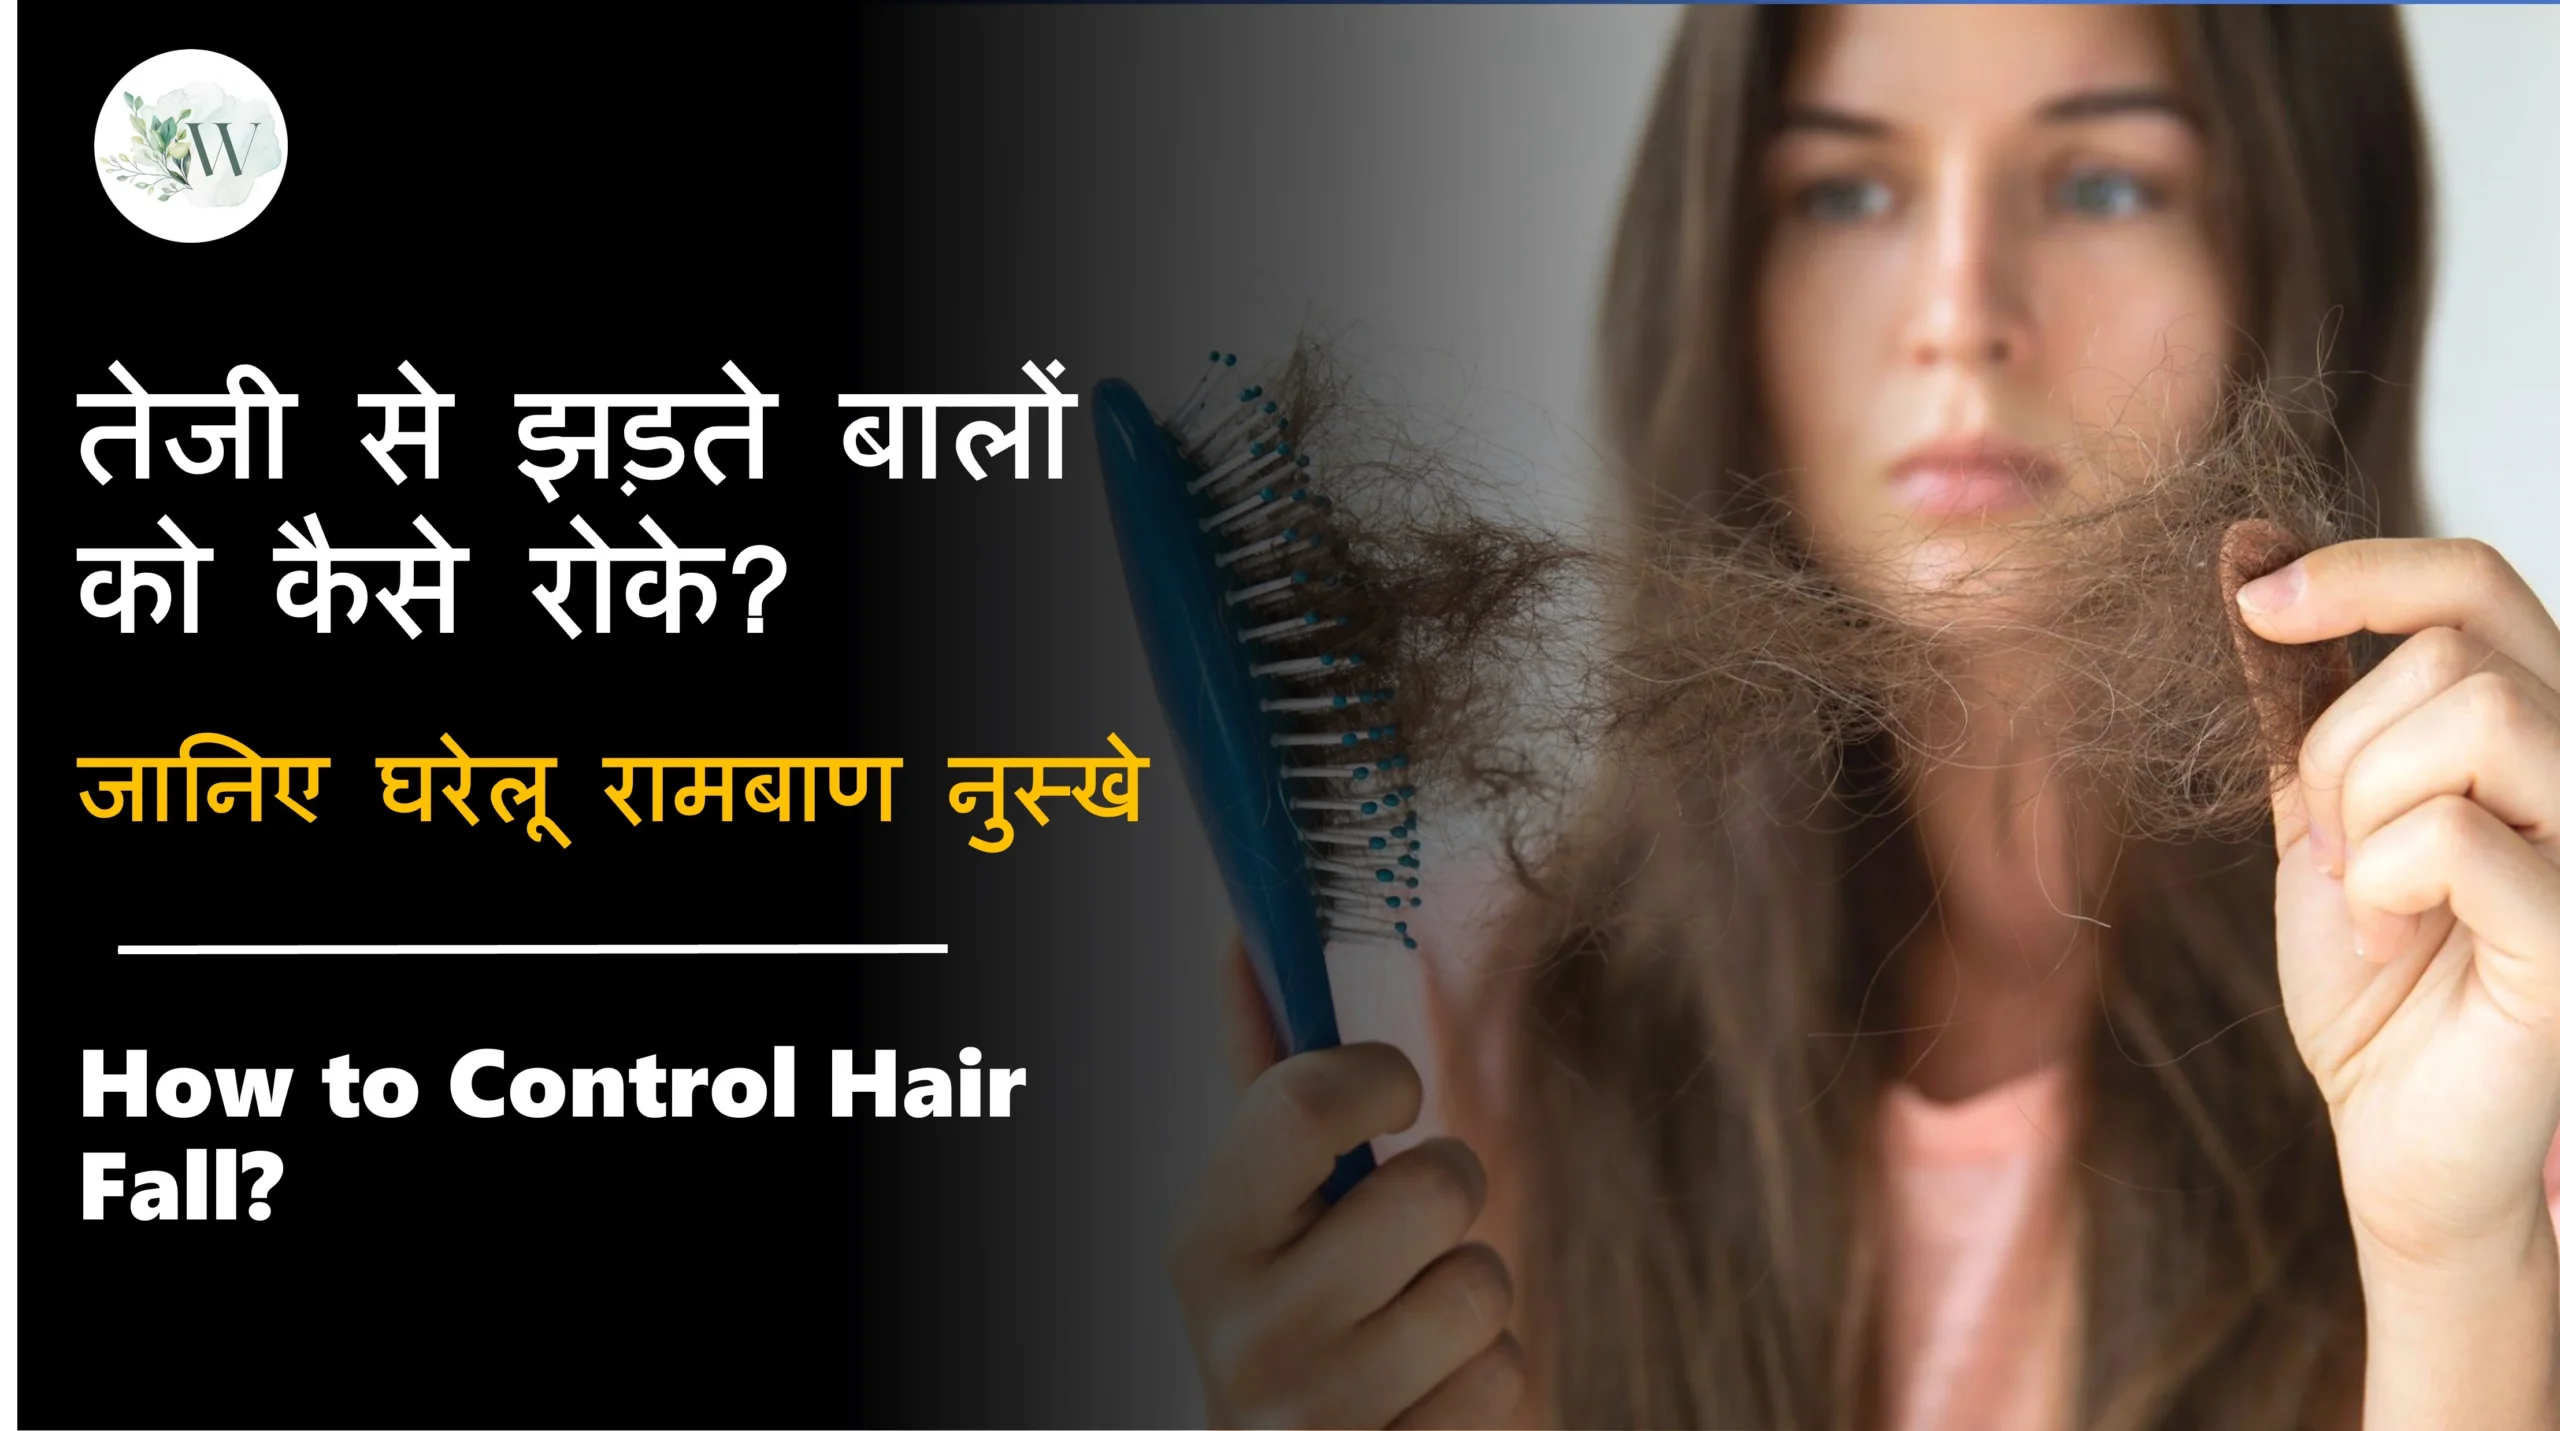 How to Control Hair Fall in Hindi